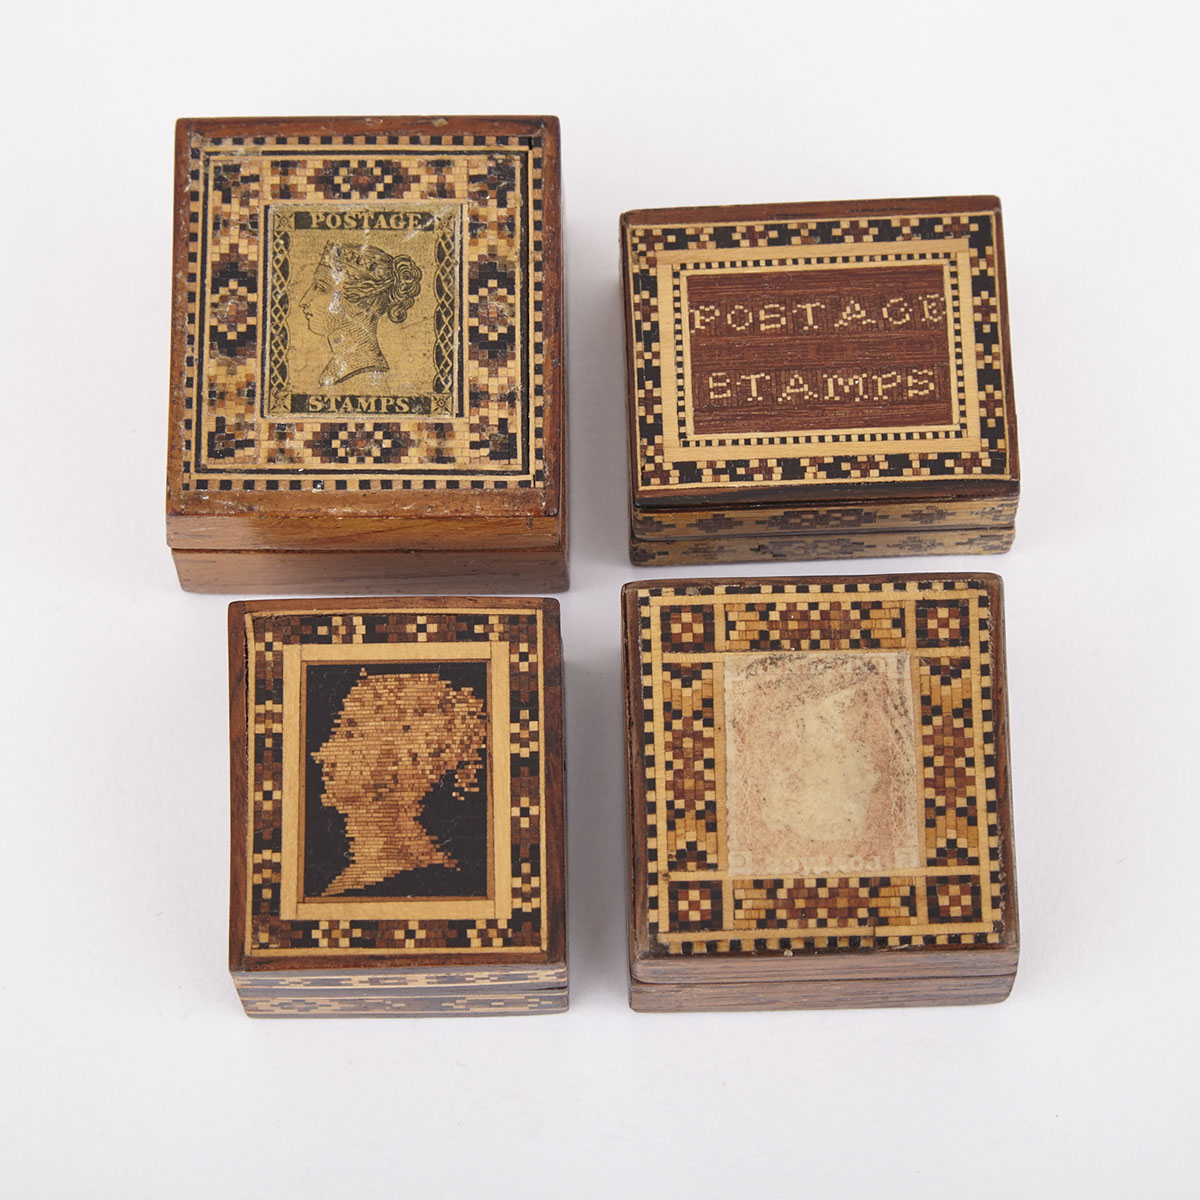 Collection of Four Victorian Tunbridge Ware Stamp Boxes, 19th century